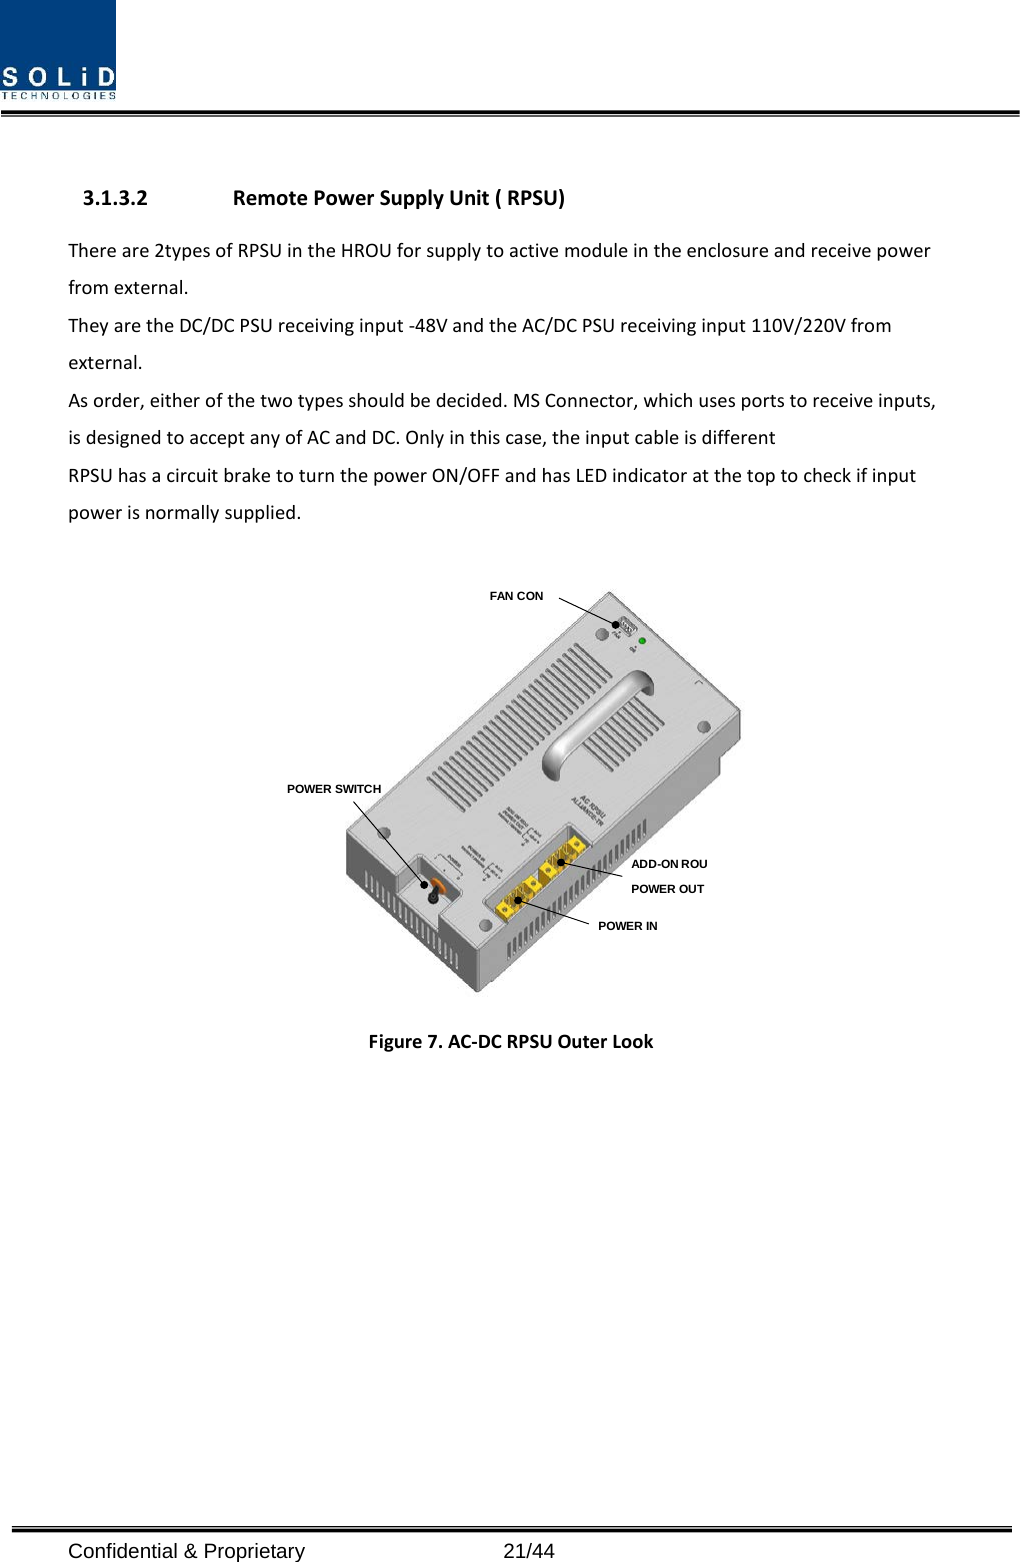   3.1.3.2 Remote Power Supply Unit ( RPSU) There are 2types of RPSU in the HROU for supply to active module in the enclosure and receive power from external.   They are the DC/DC PSU receiving input -48V and the AC/DC PSU receiving input 110V/220V from external. As order, either of the two types should be decided. MS Connector, which uses ports to receive inputs, is designed to accept any of AC and DC. Only in this case, the input cable is different RPSU has a circuit brake to turn the power ON/OFF and has LED indicator at the top to check if input power is normally supplied.  POWER SWITCHFAN CONPOWER INADD-ON ROU POWER OUT Figure 7. AC-DC RPSU Outer Look Confidential &amp; Proprietary                   21/44 